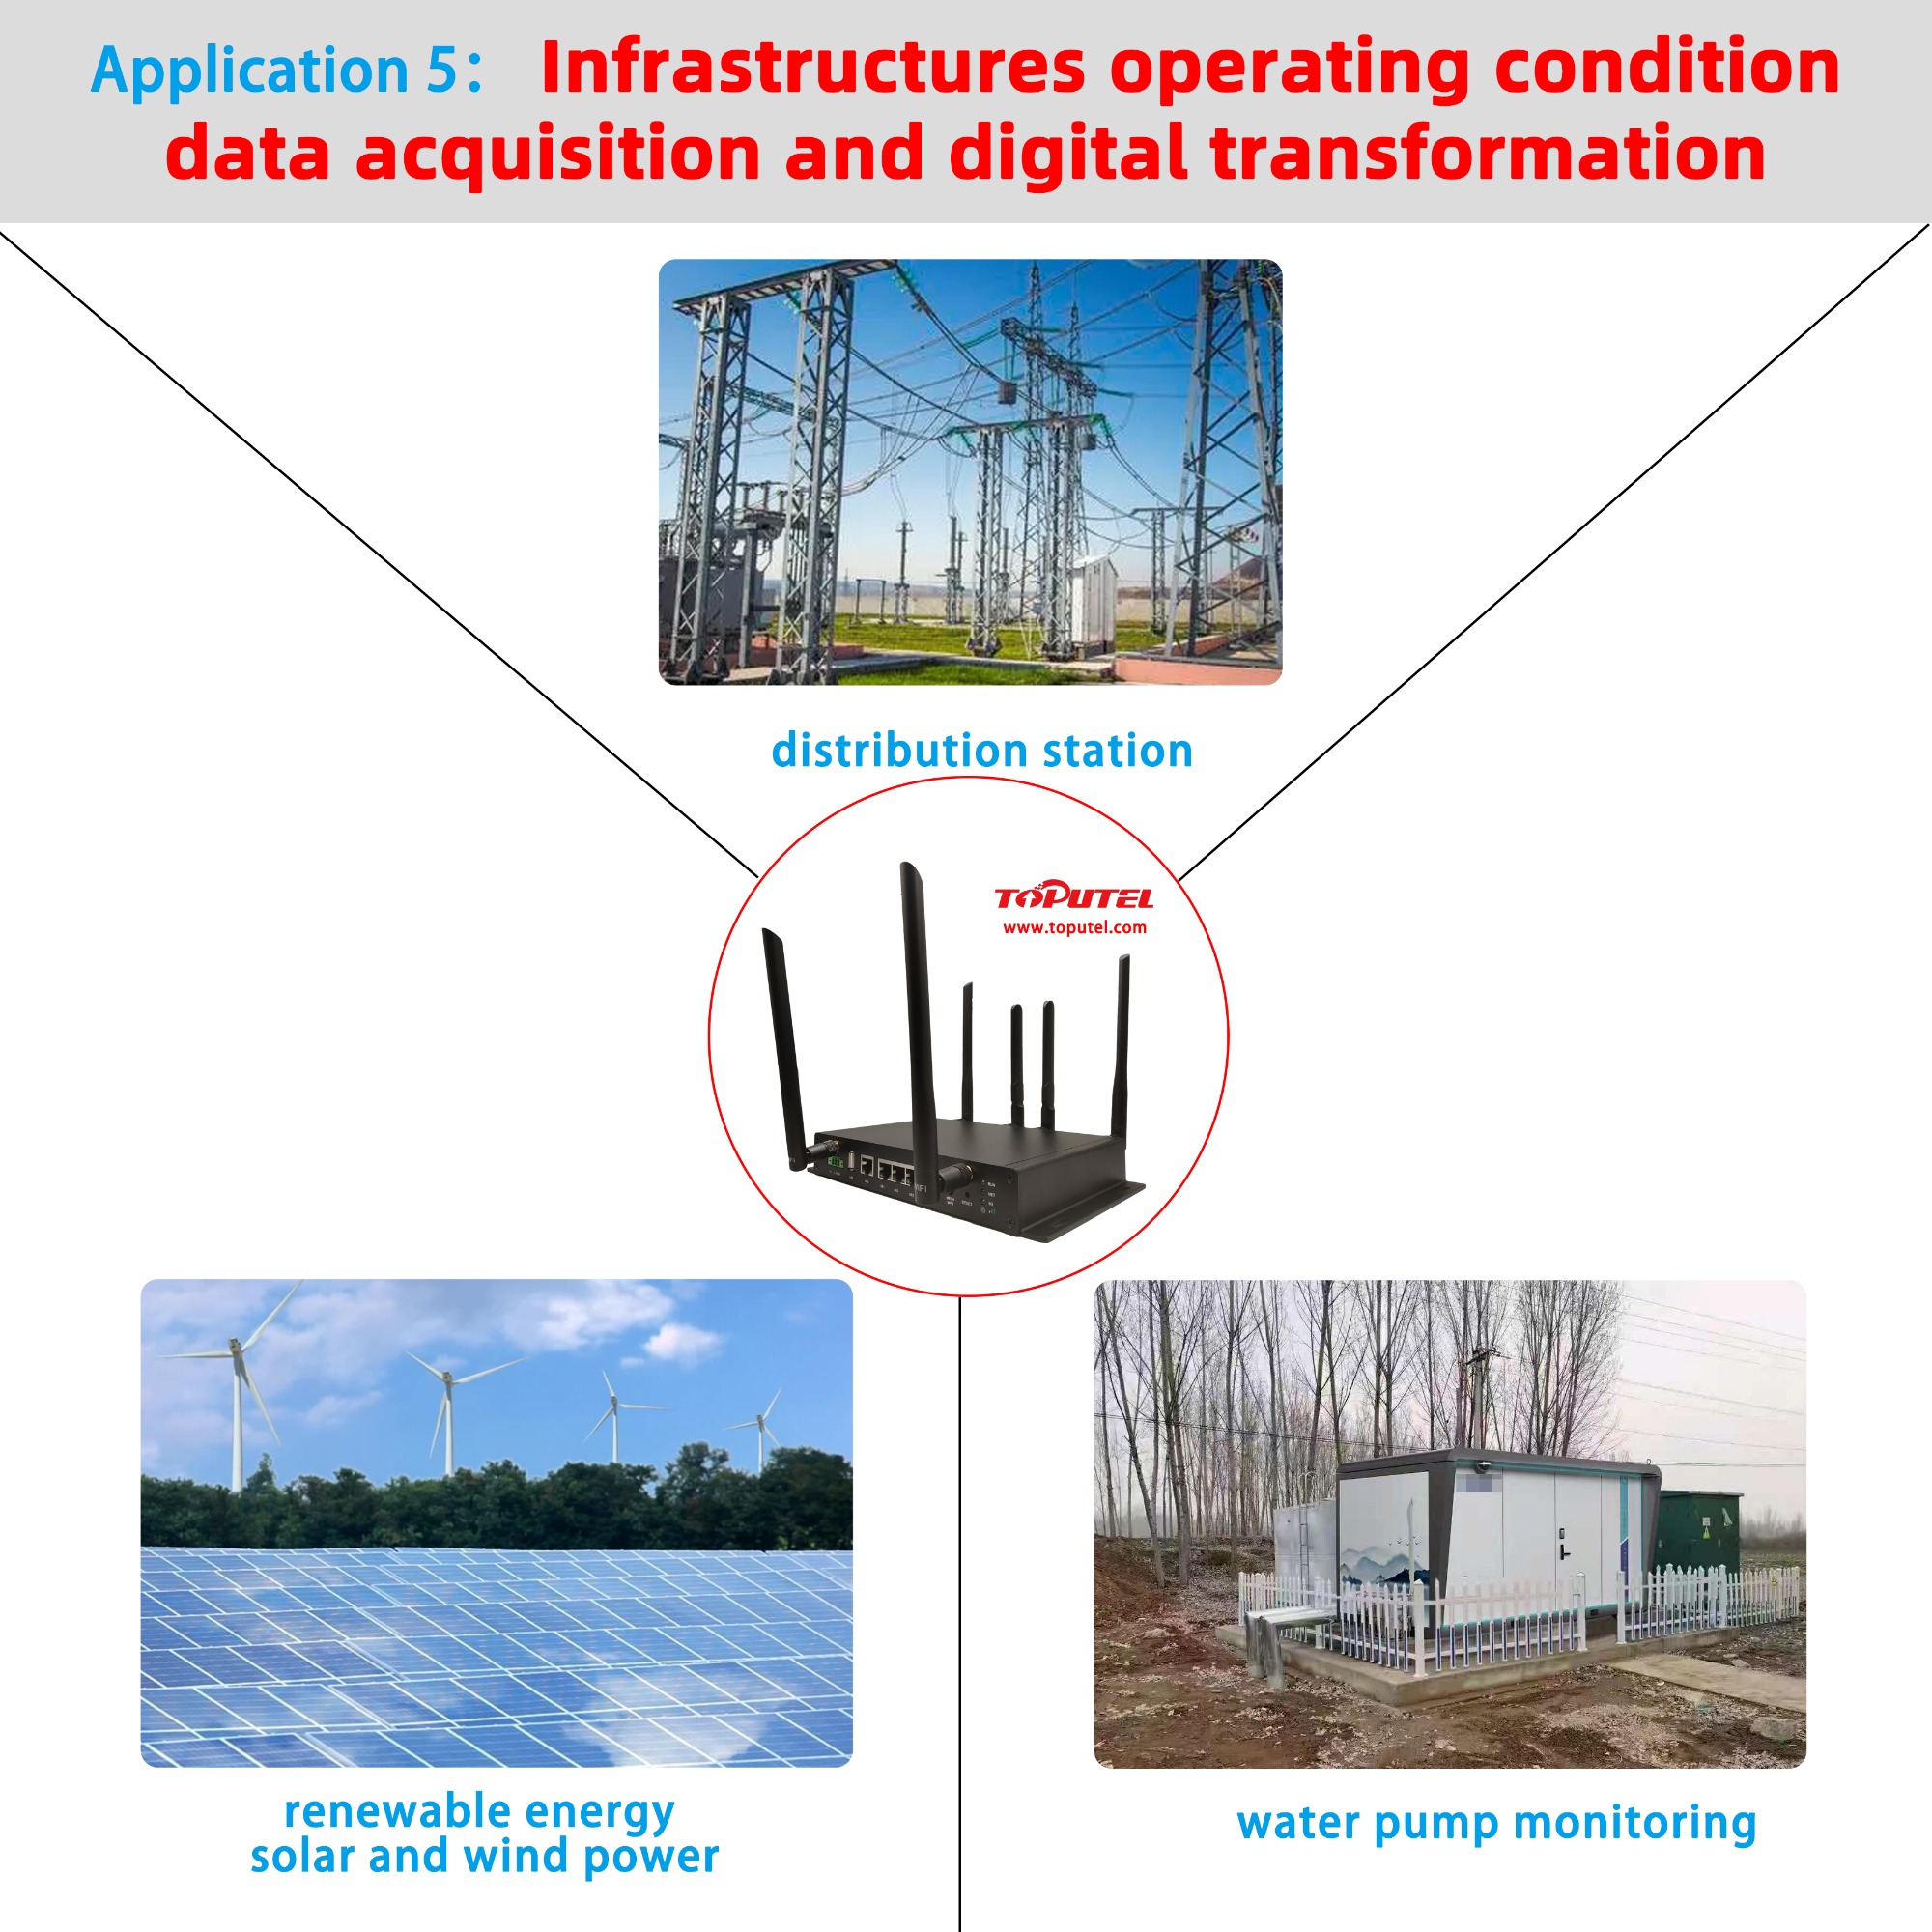 Infrastructures operating condition data acquisition and digital transformation - 4G Industrial Router RG4000-W4M 